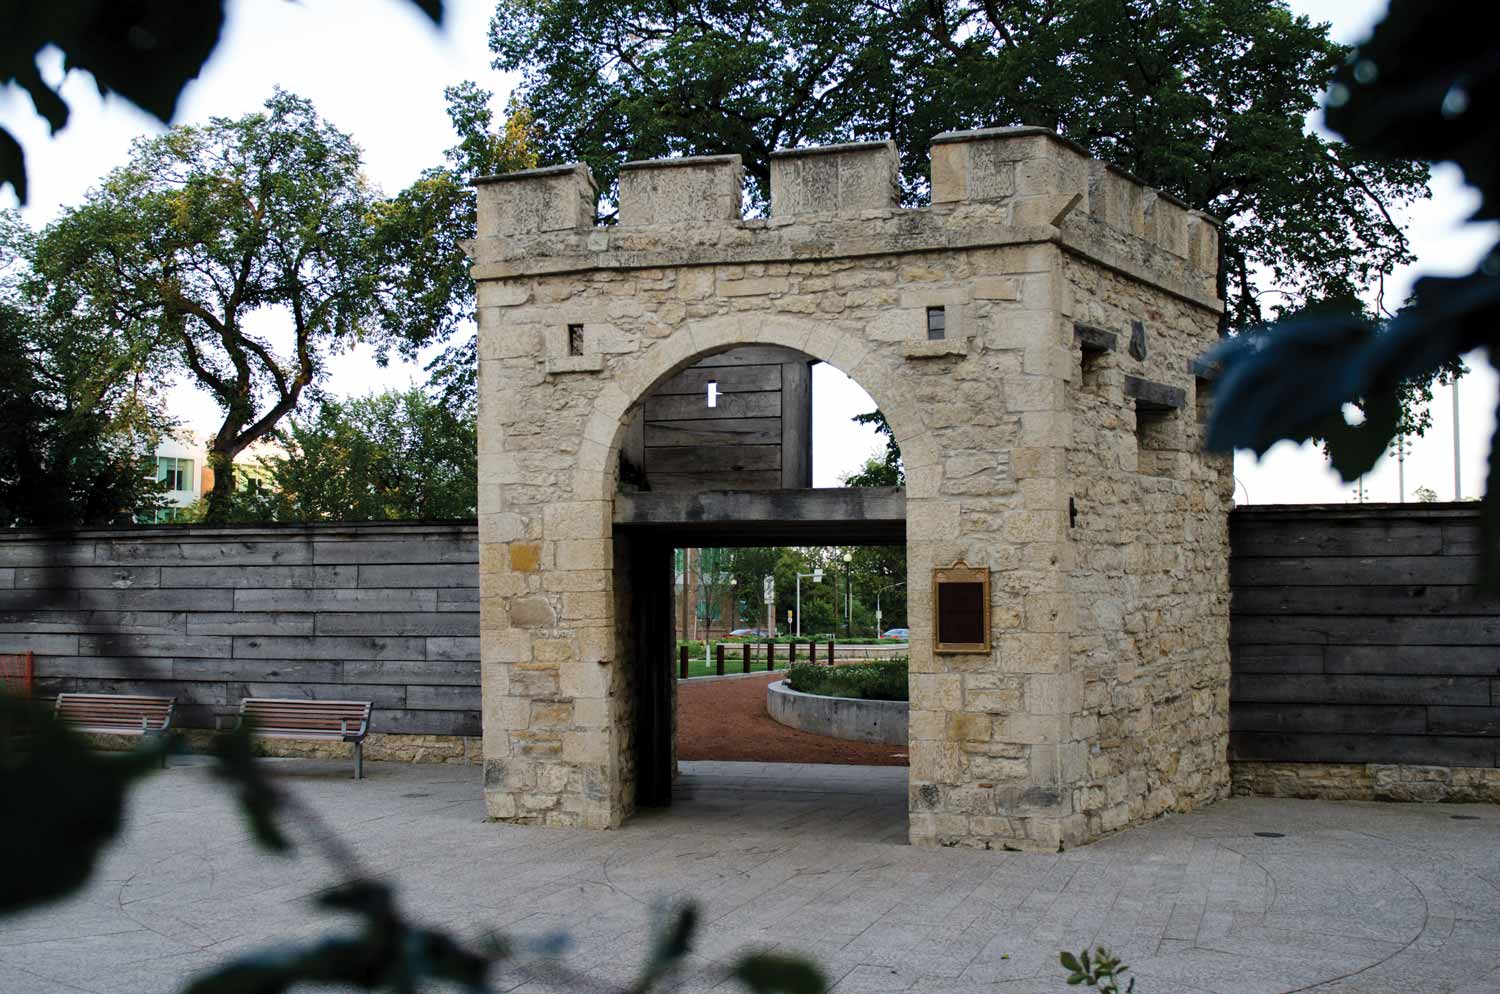 The north entrance to Upper Fort Garry, showing the original stone Governor's Gate flanked by a newer wooden fence.